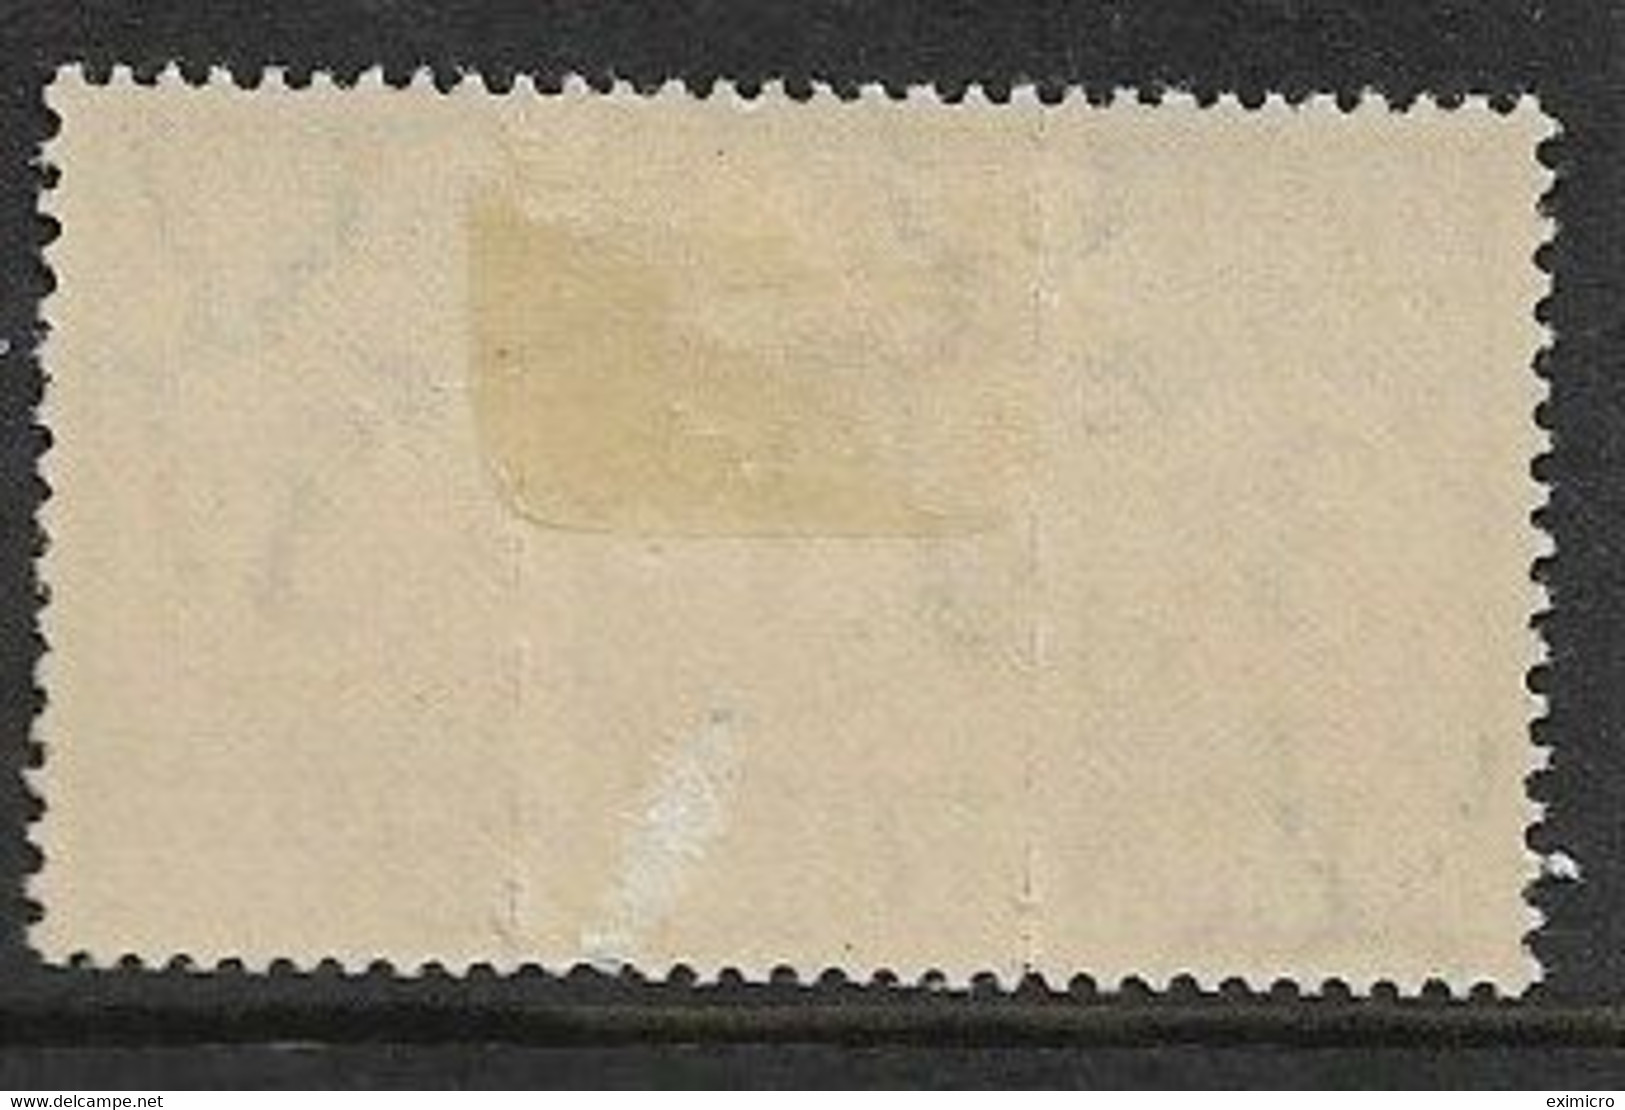 SOUTH AFRICA 1943 - 1944 3d POSTAGE DUE SG D33 MOUNTED MINT TOP VALUE OF THE SET Cat £75 - Strafport